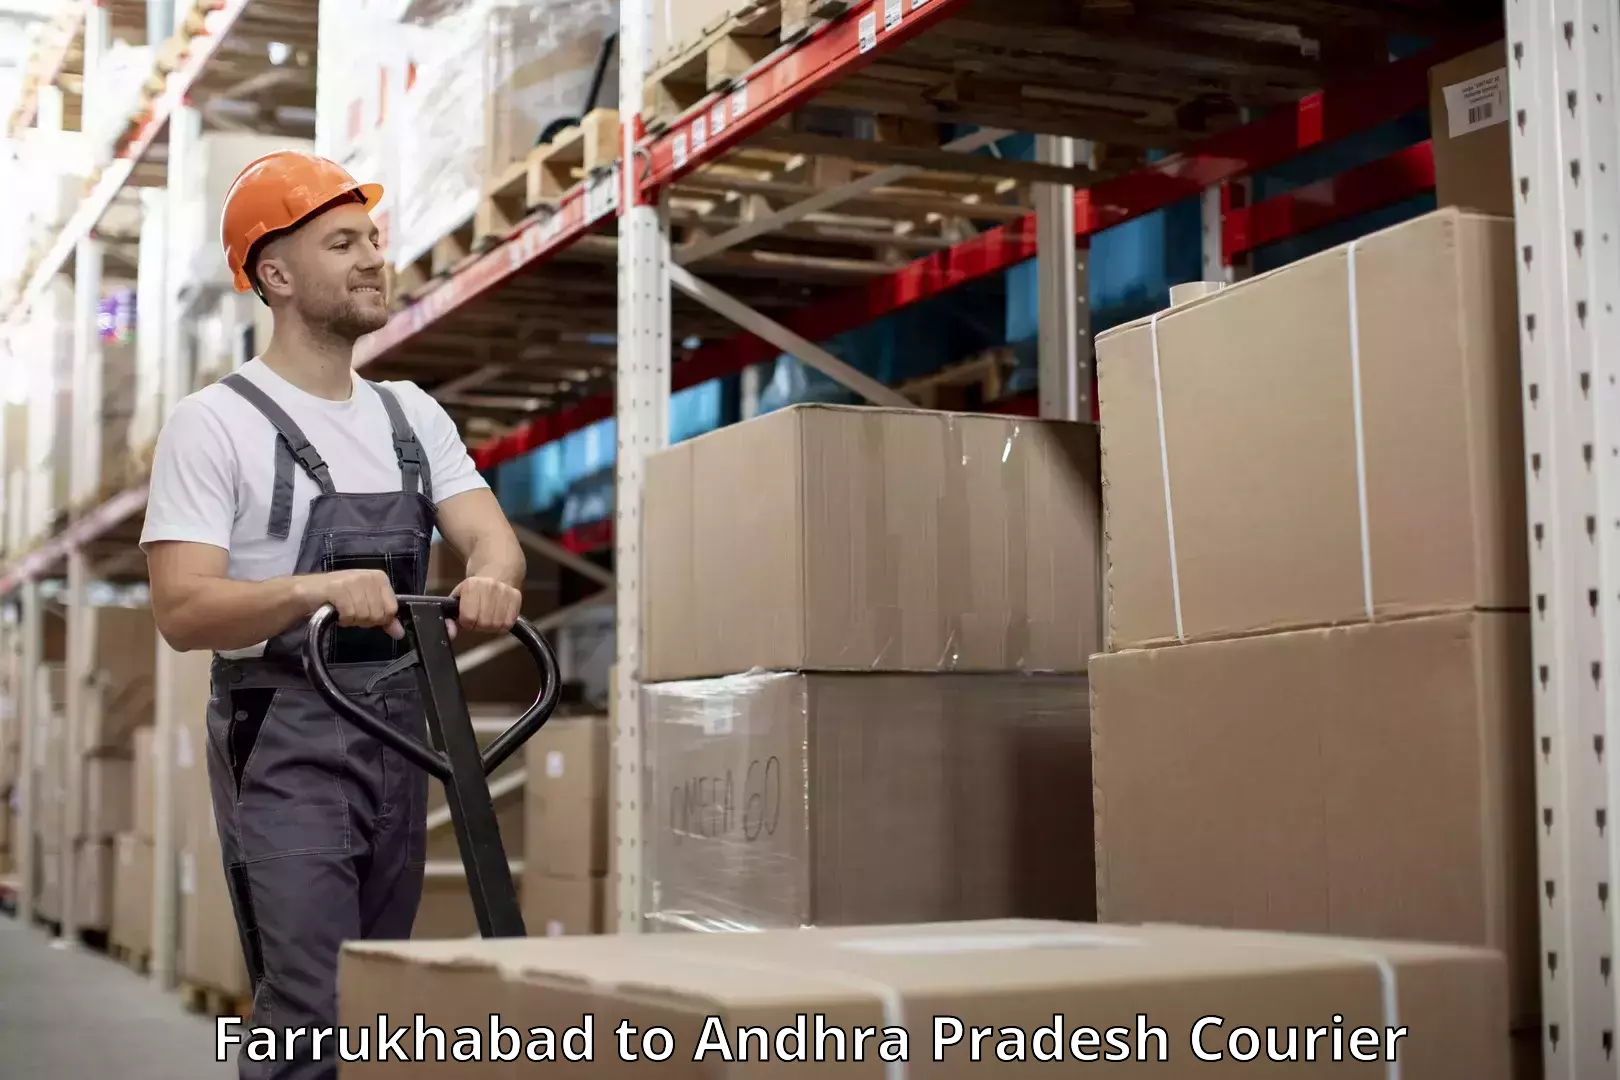 Luggage transport consultancy Farrukhabad to Andhra Pradesh